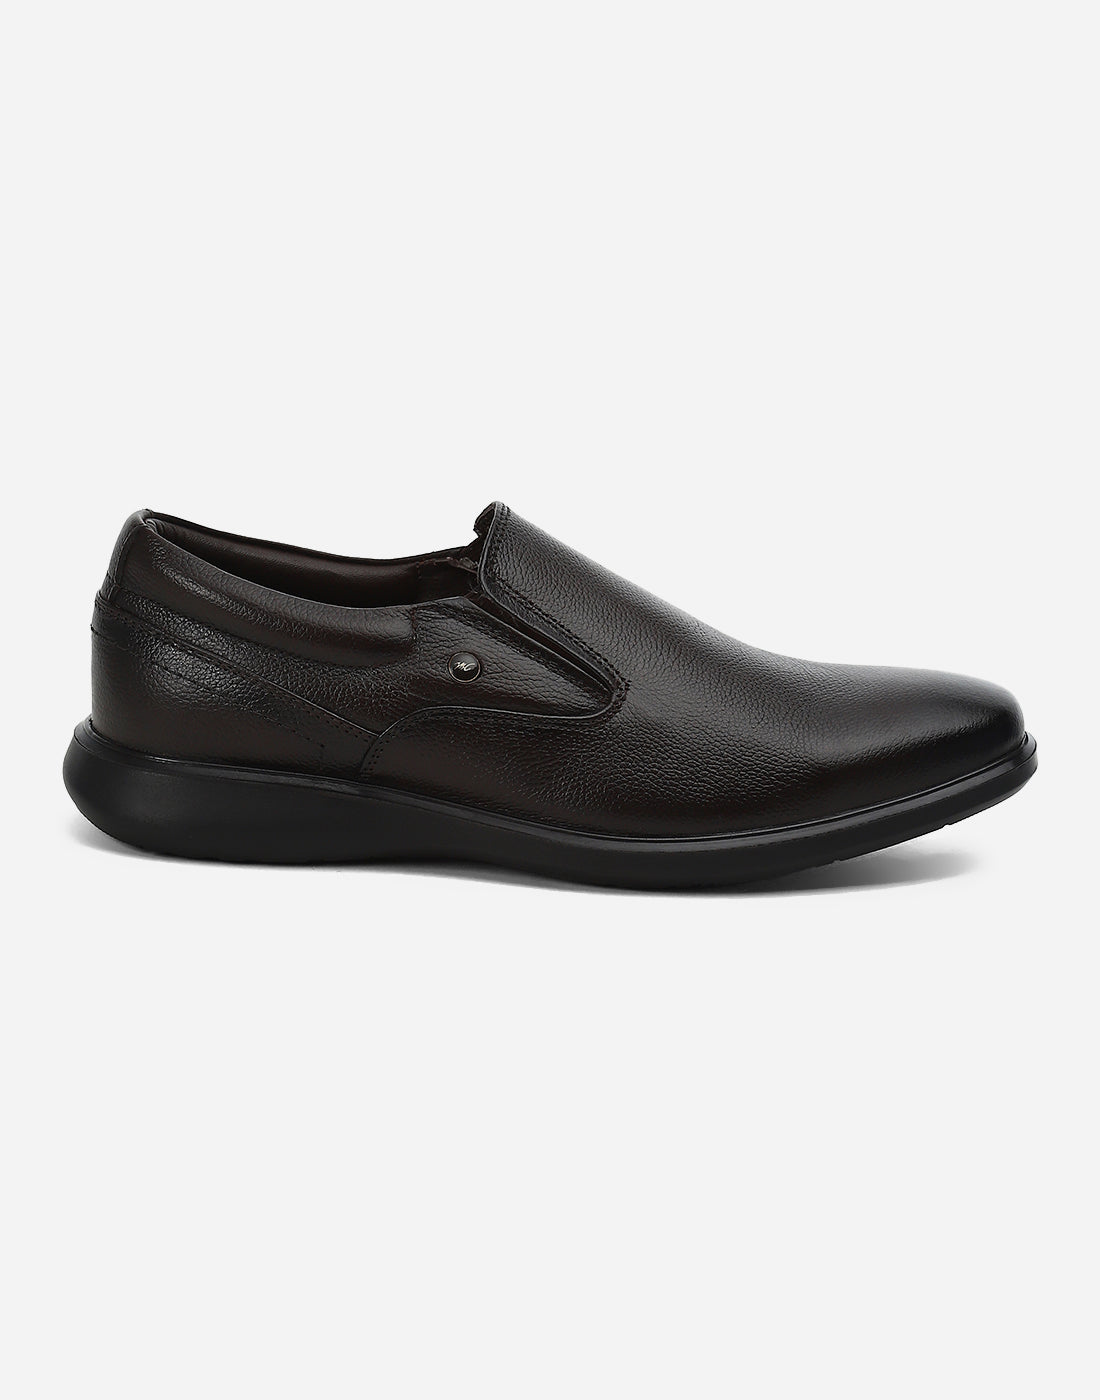 Men Brown Genuine Leather Slip on Shoes